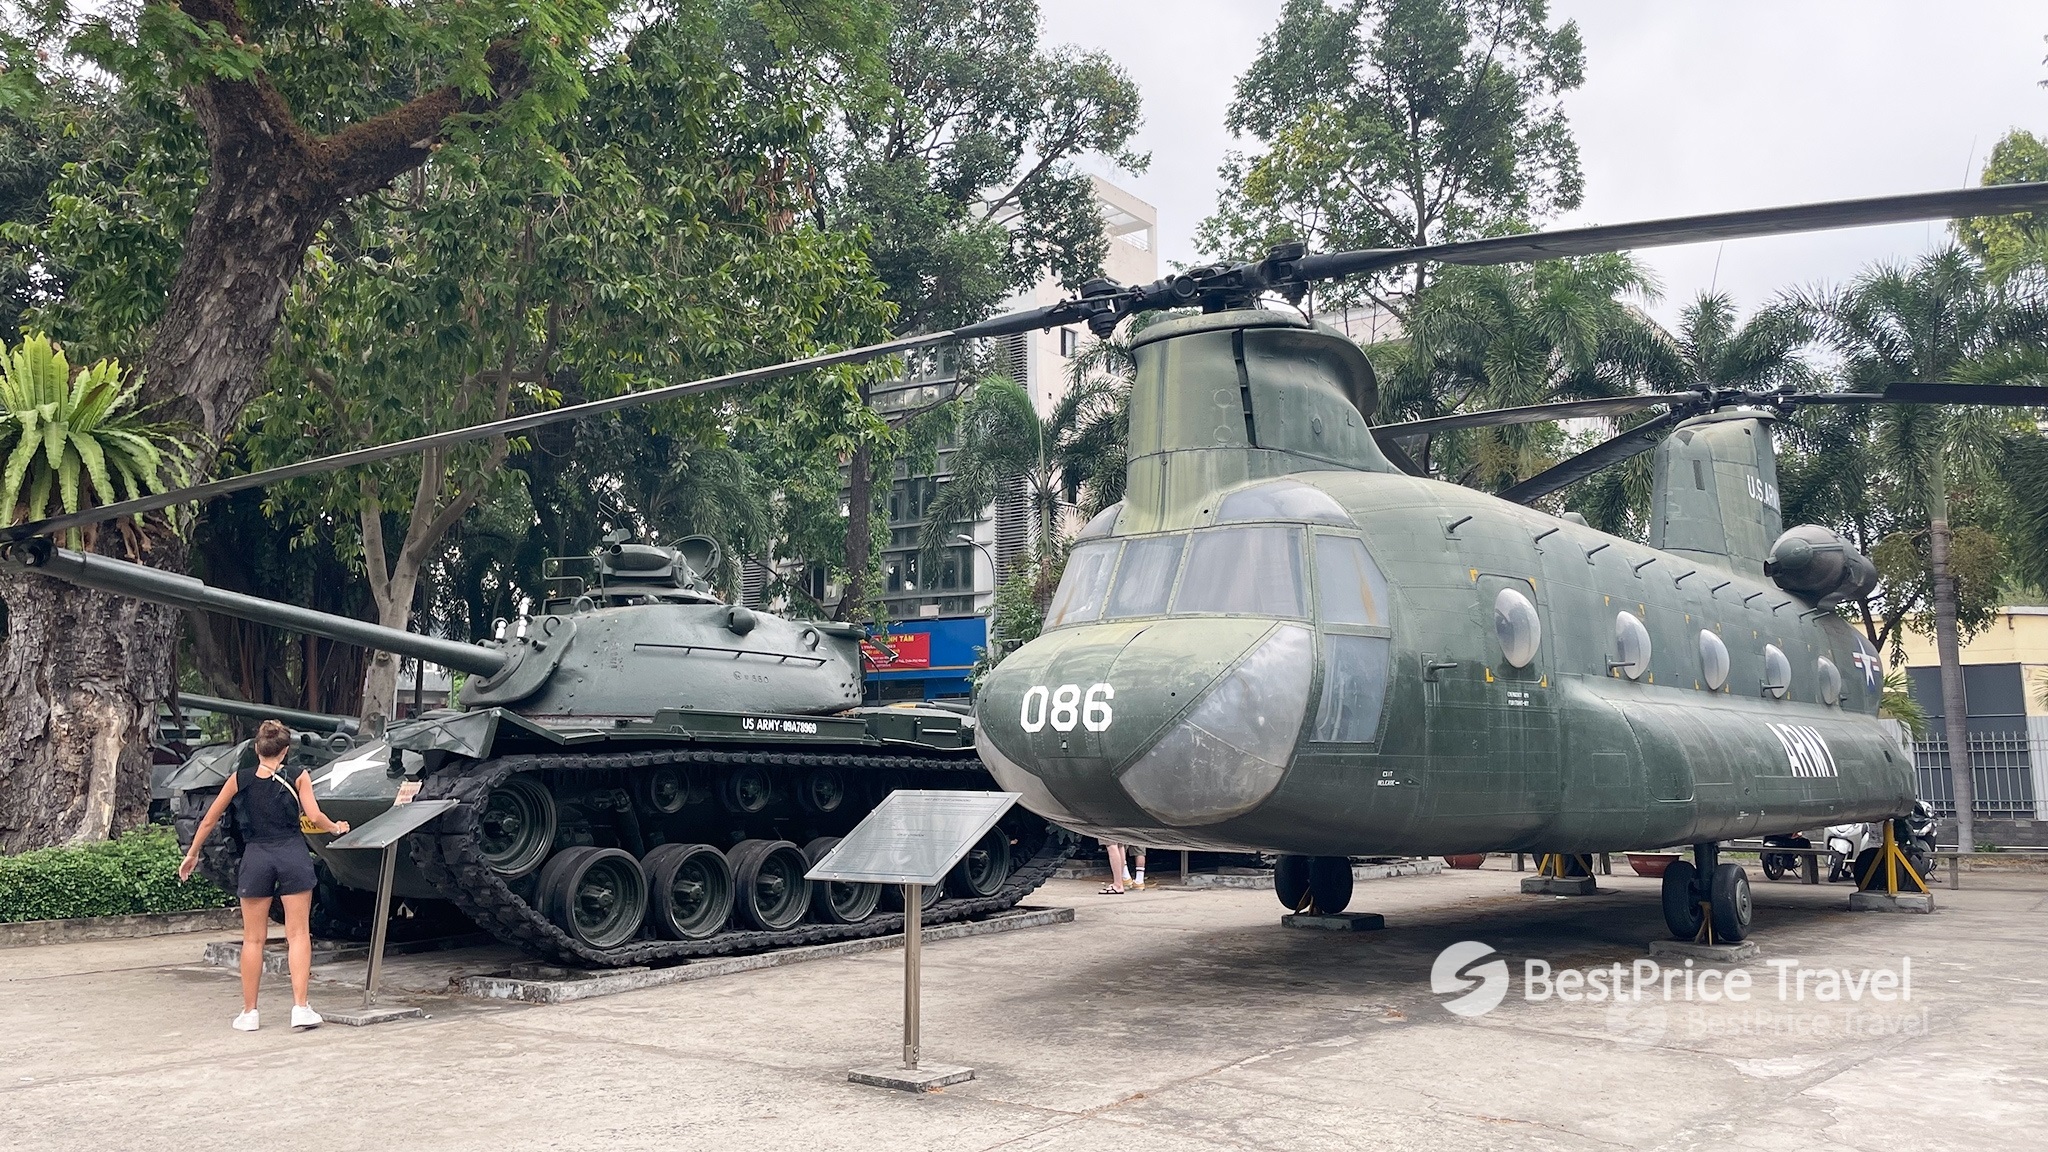 A Visit To The War Remnants Museum Is A Must For Anyone Interested In Vietnam's Fascinating Past